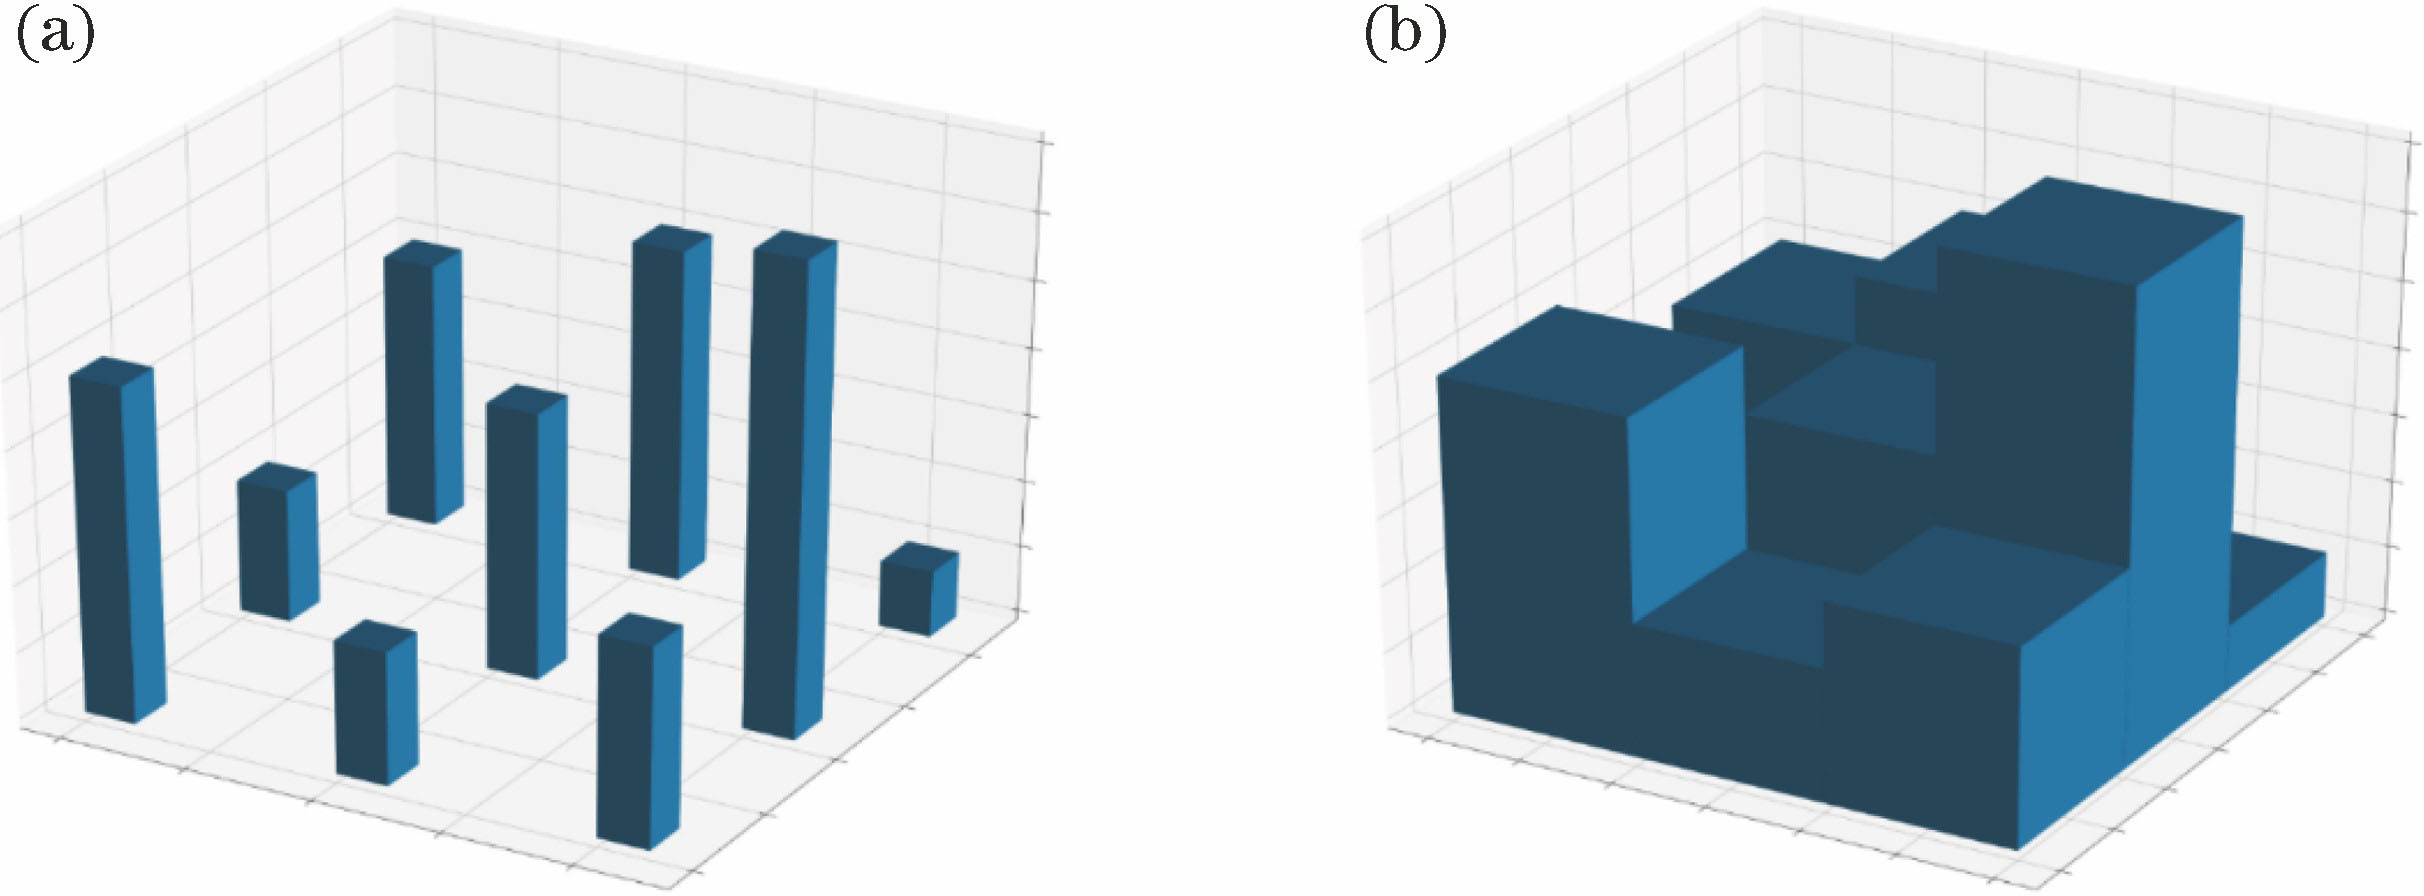 Dilated convolution and smoothing effect[24]. (a) Dilated convolution; (b) dilated convolution after smoothing